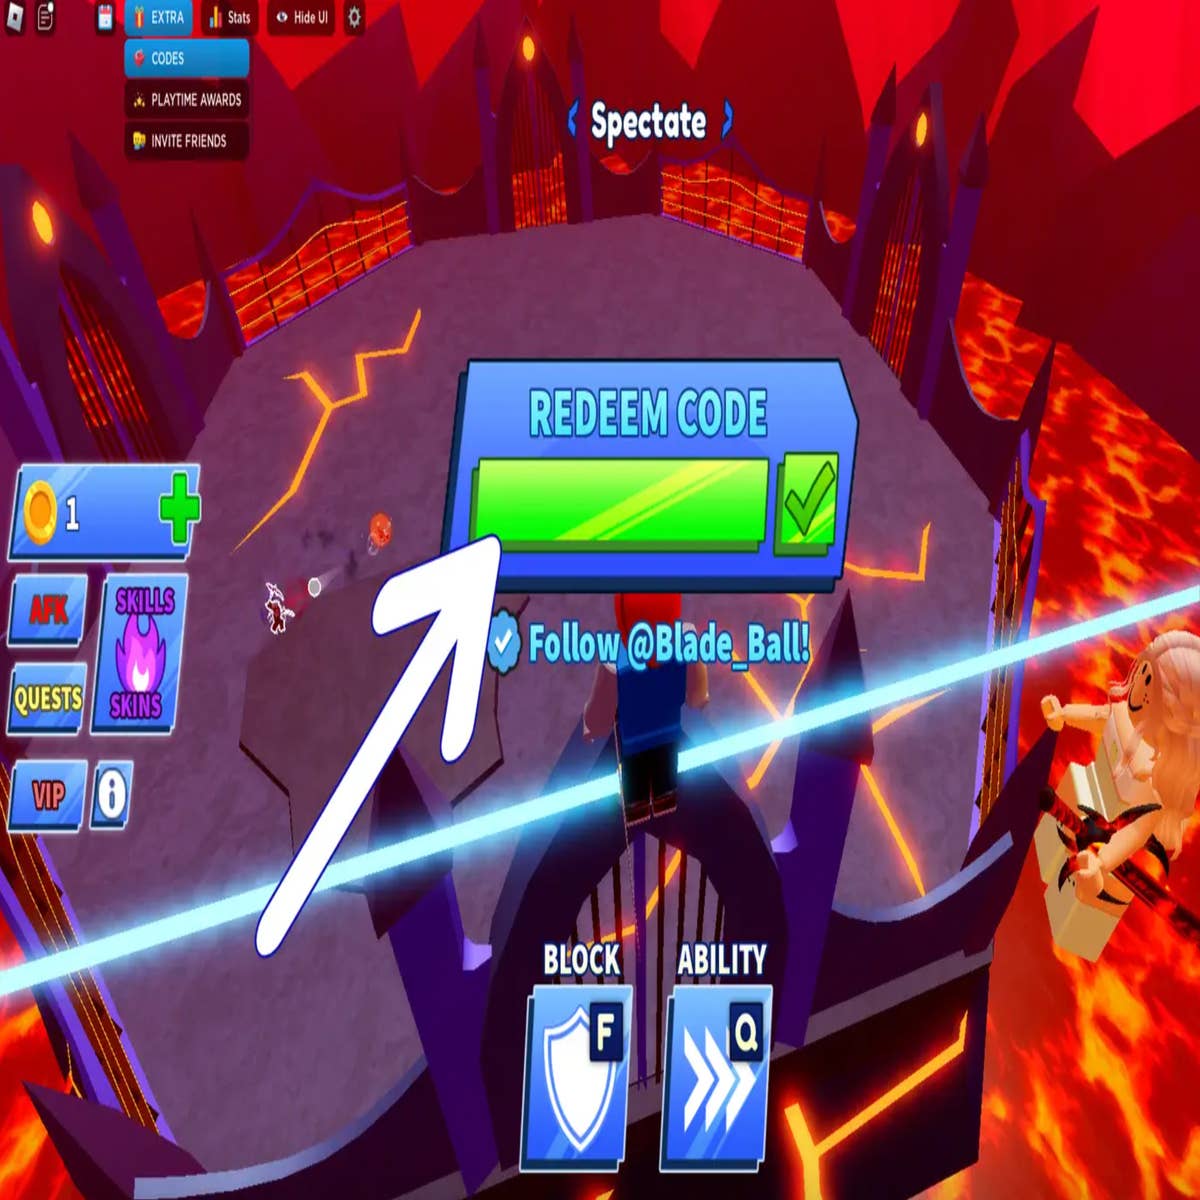 NEW CODES WORK *NEW EVENT* [Update 9] Max Speed ROBLOX